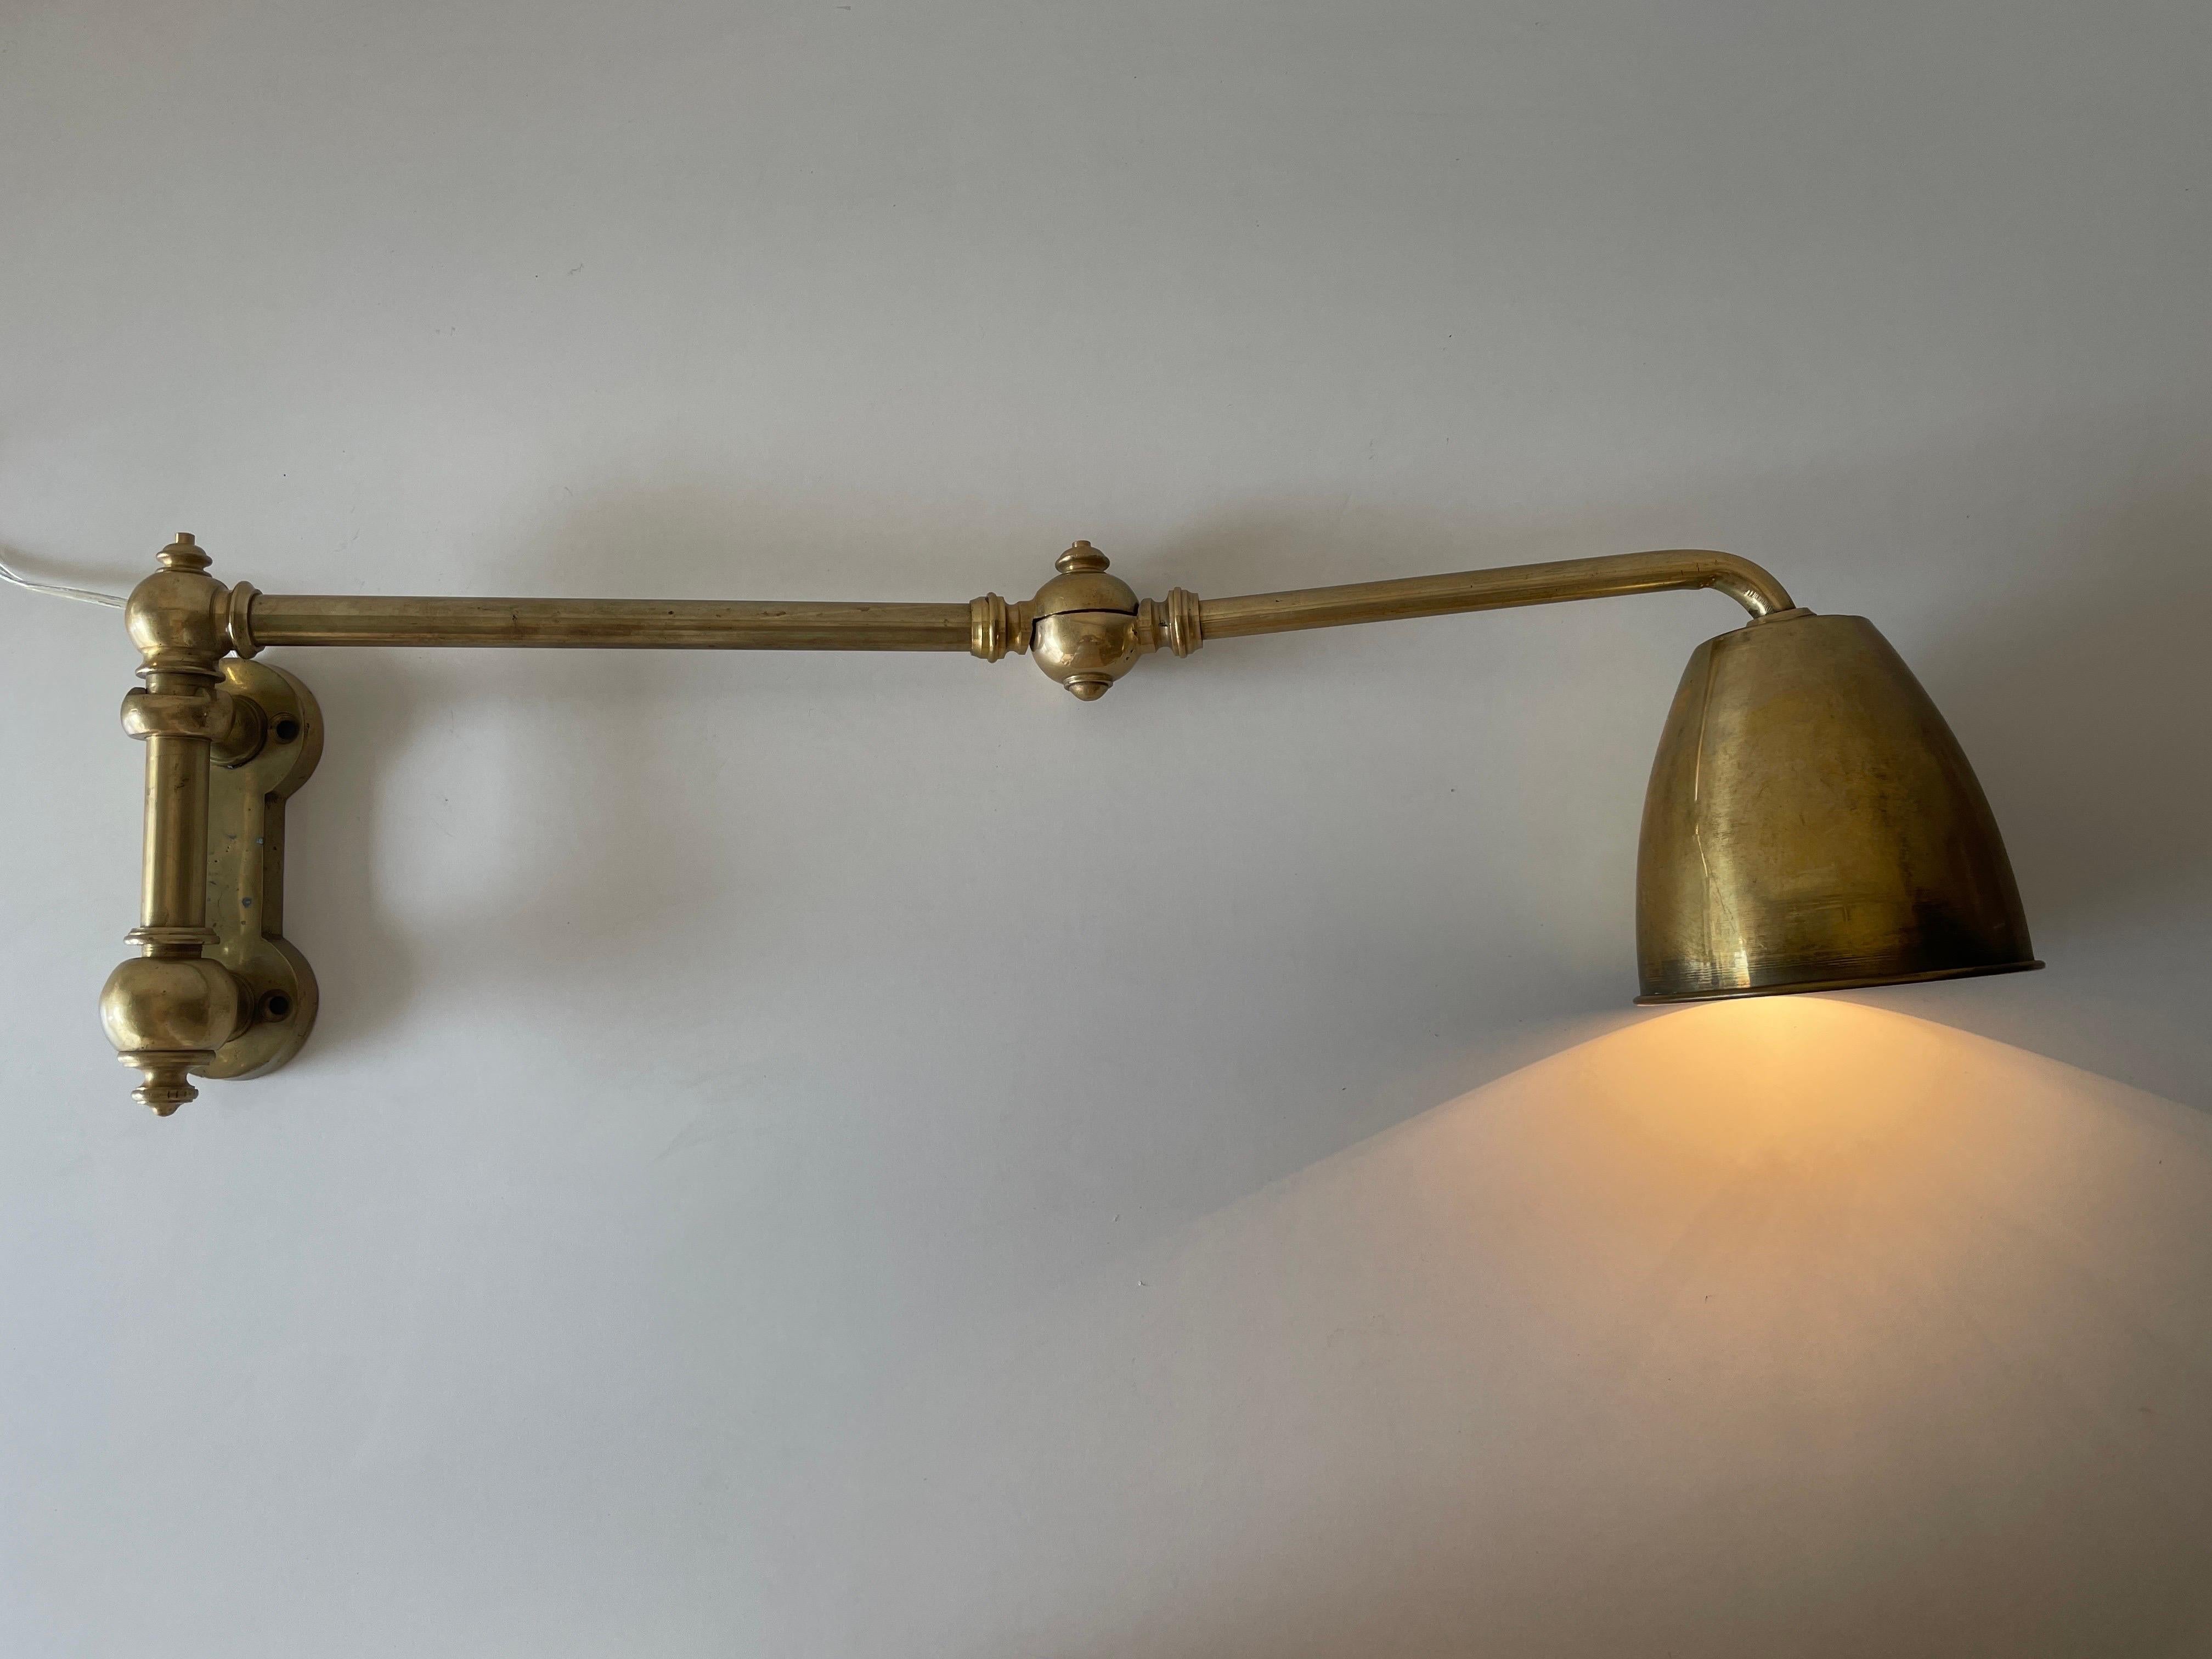 Full Brass Adjustable Head and Arm Industrial Task Wall Lamp, 1940s, Germany For Sale 9